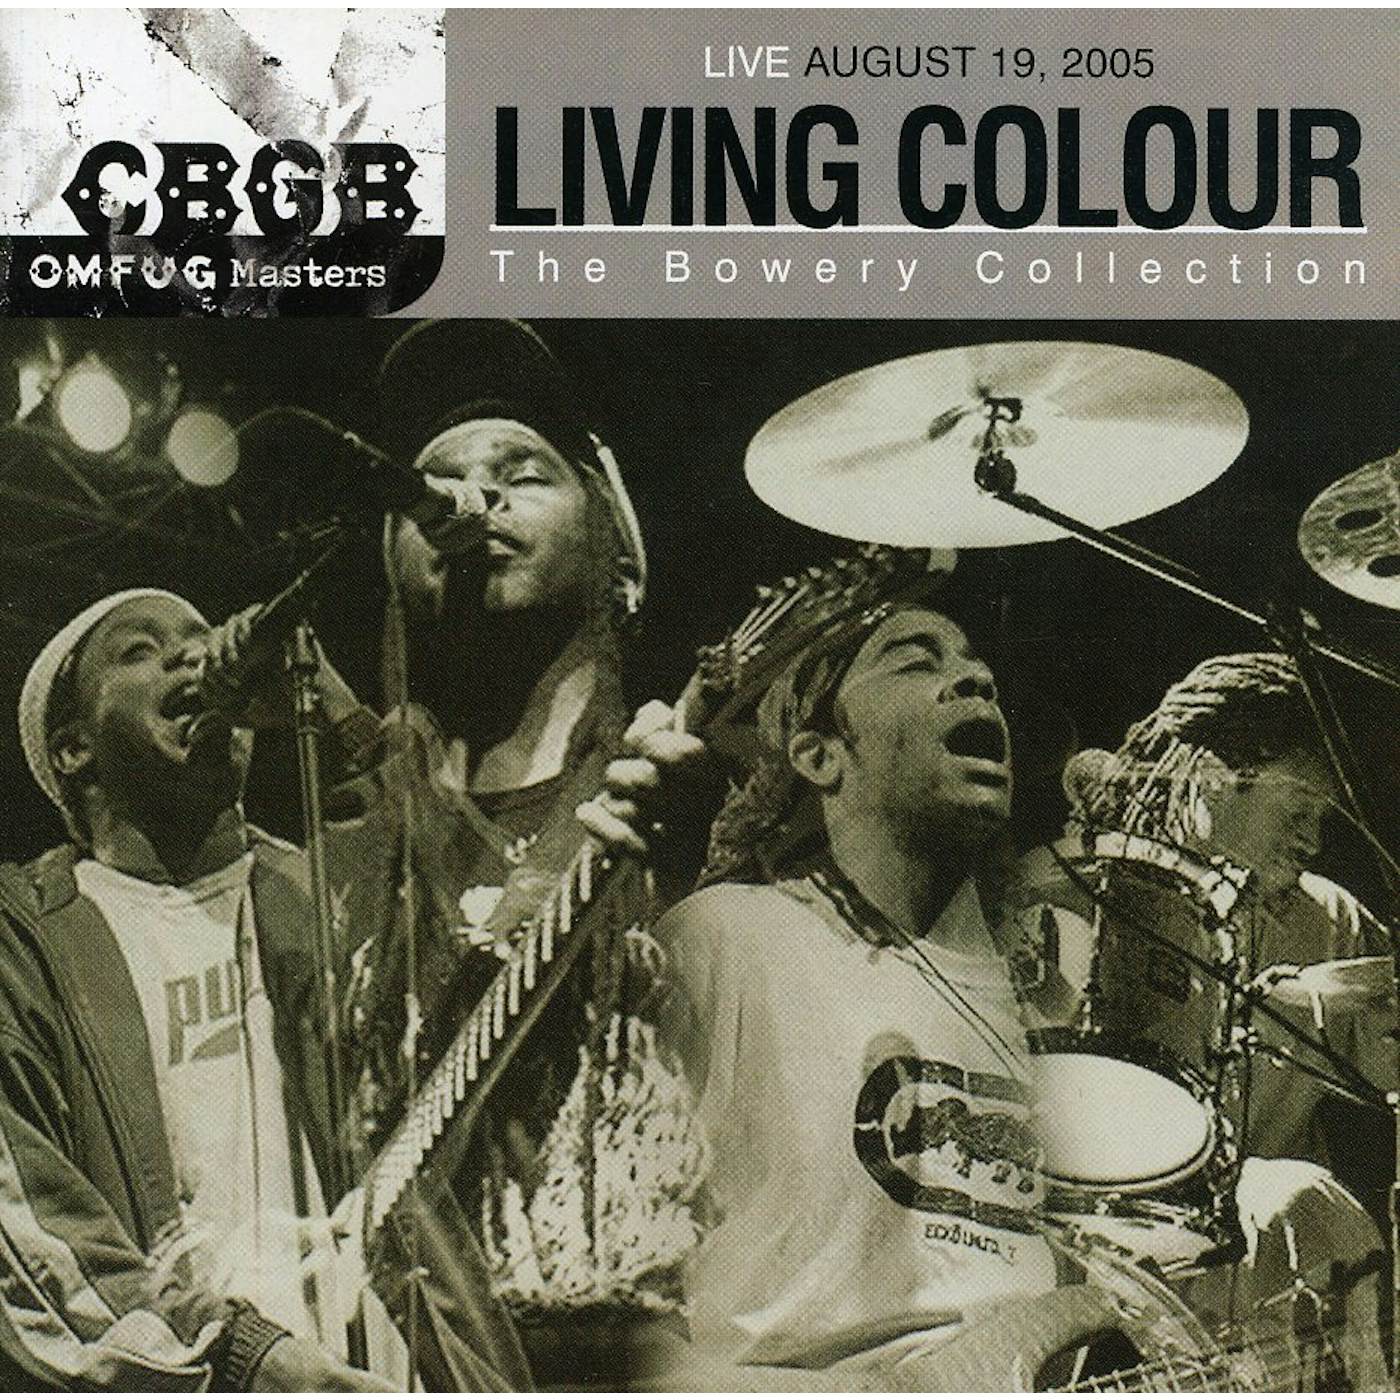 Living Colour CBGB OMFUG MASTERS: 8-19-05 BOWERY COLLECTION CD